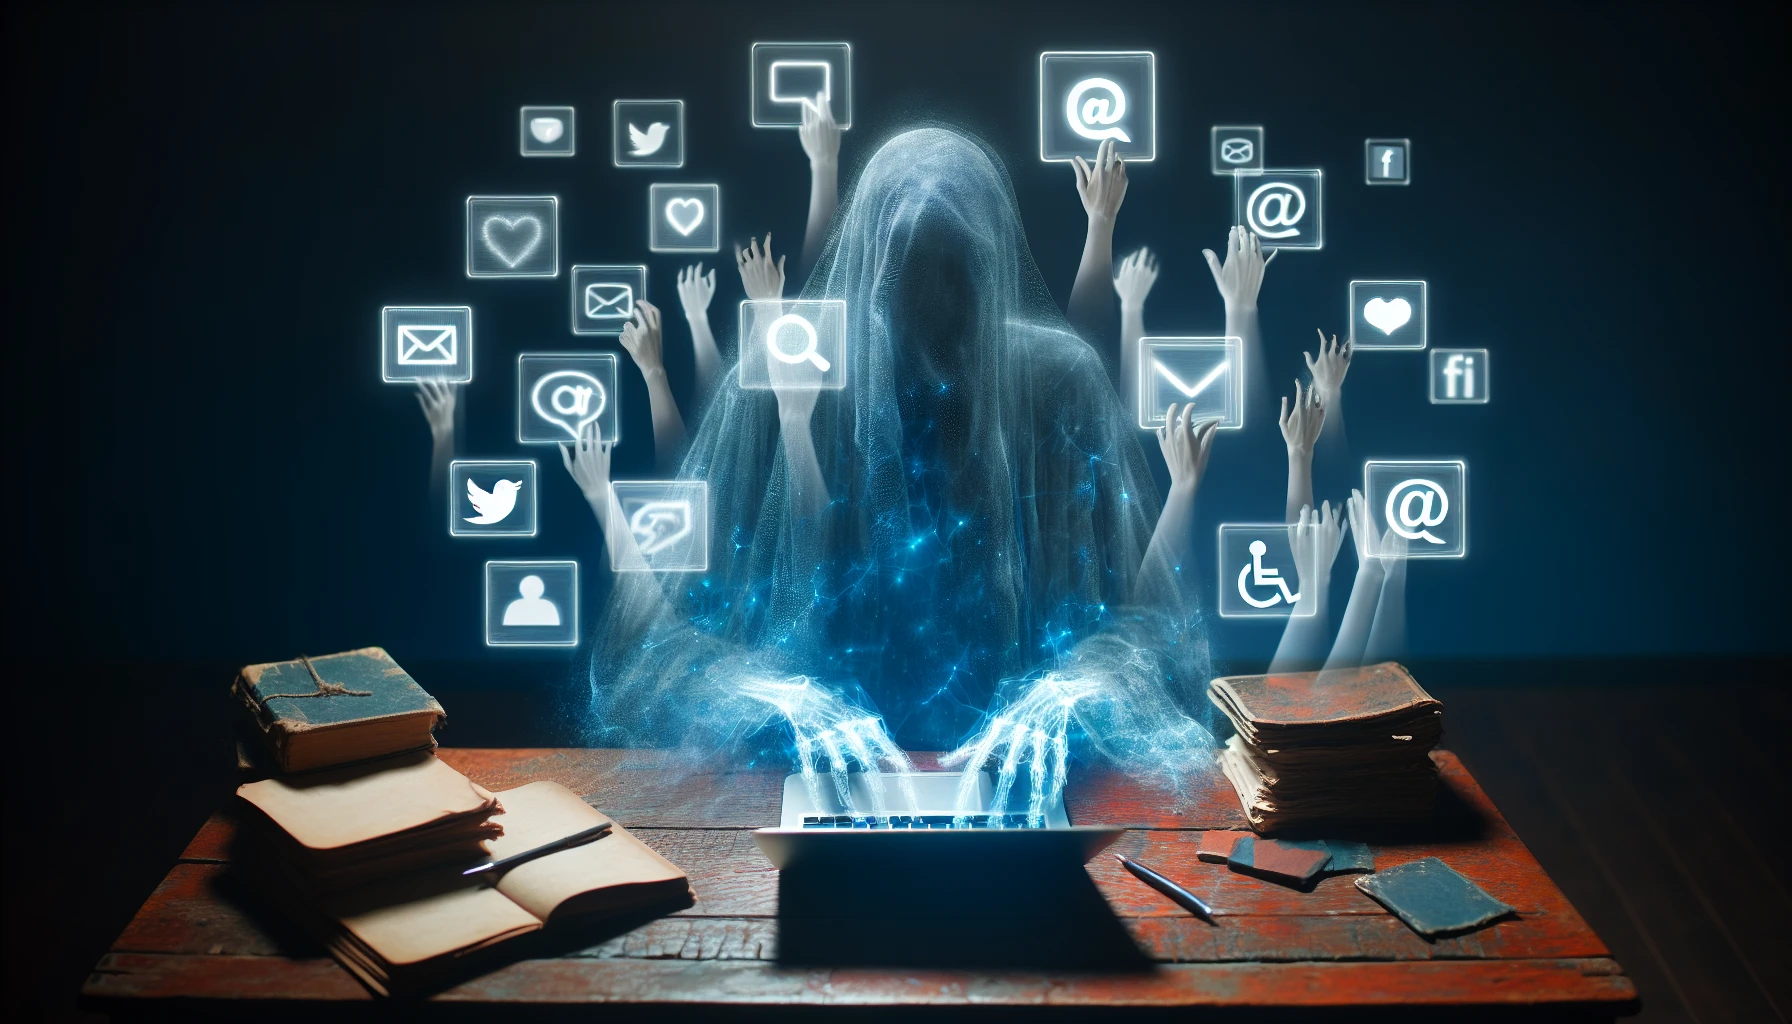 A ghostwriter sharing expertise on social media to attract potential clients